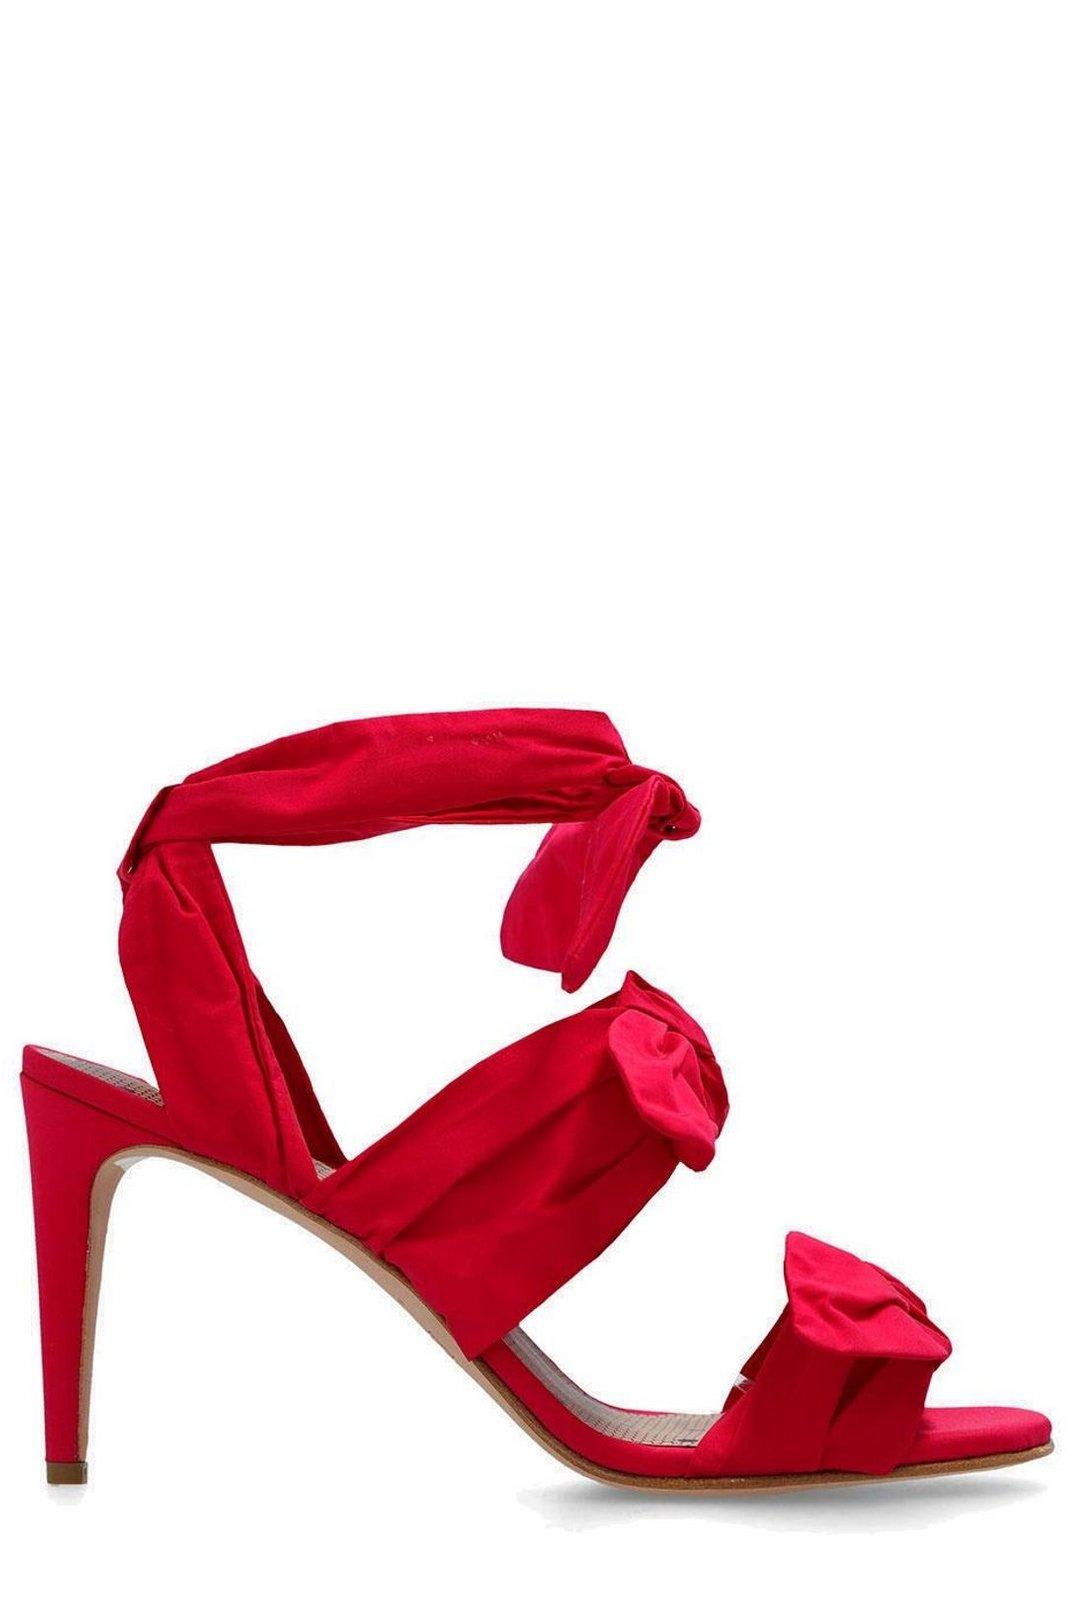 RED Valentino Redvalentino Bow Detailed Sandals